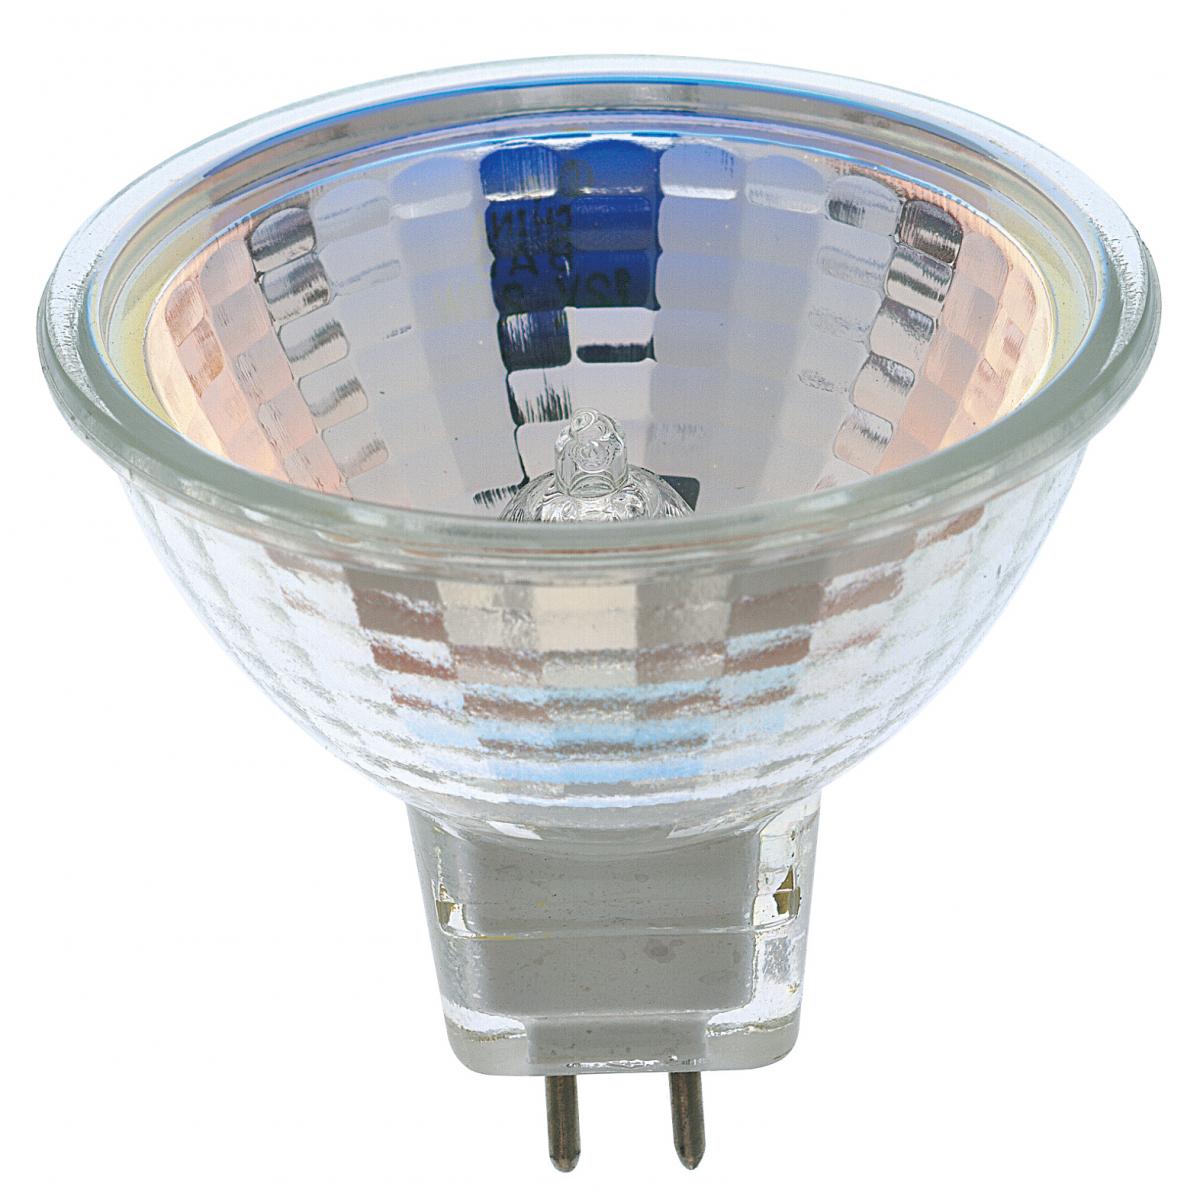 Replacement for Satco S3143 50 Watt Halogen MR16 EXZ 2000 Average rated hours Miniature 2 Pin Round base 12 Volt - NOW LED